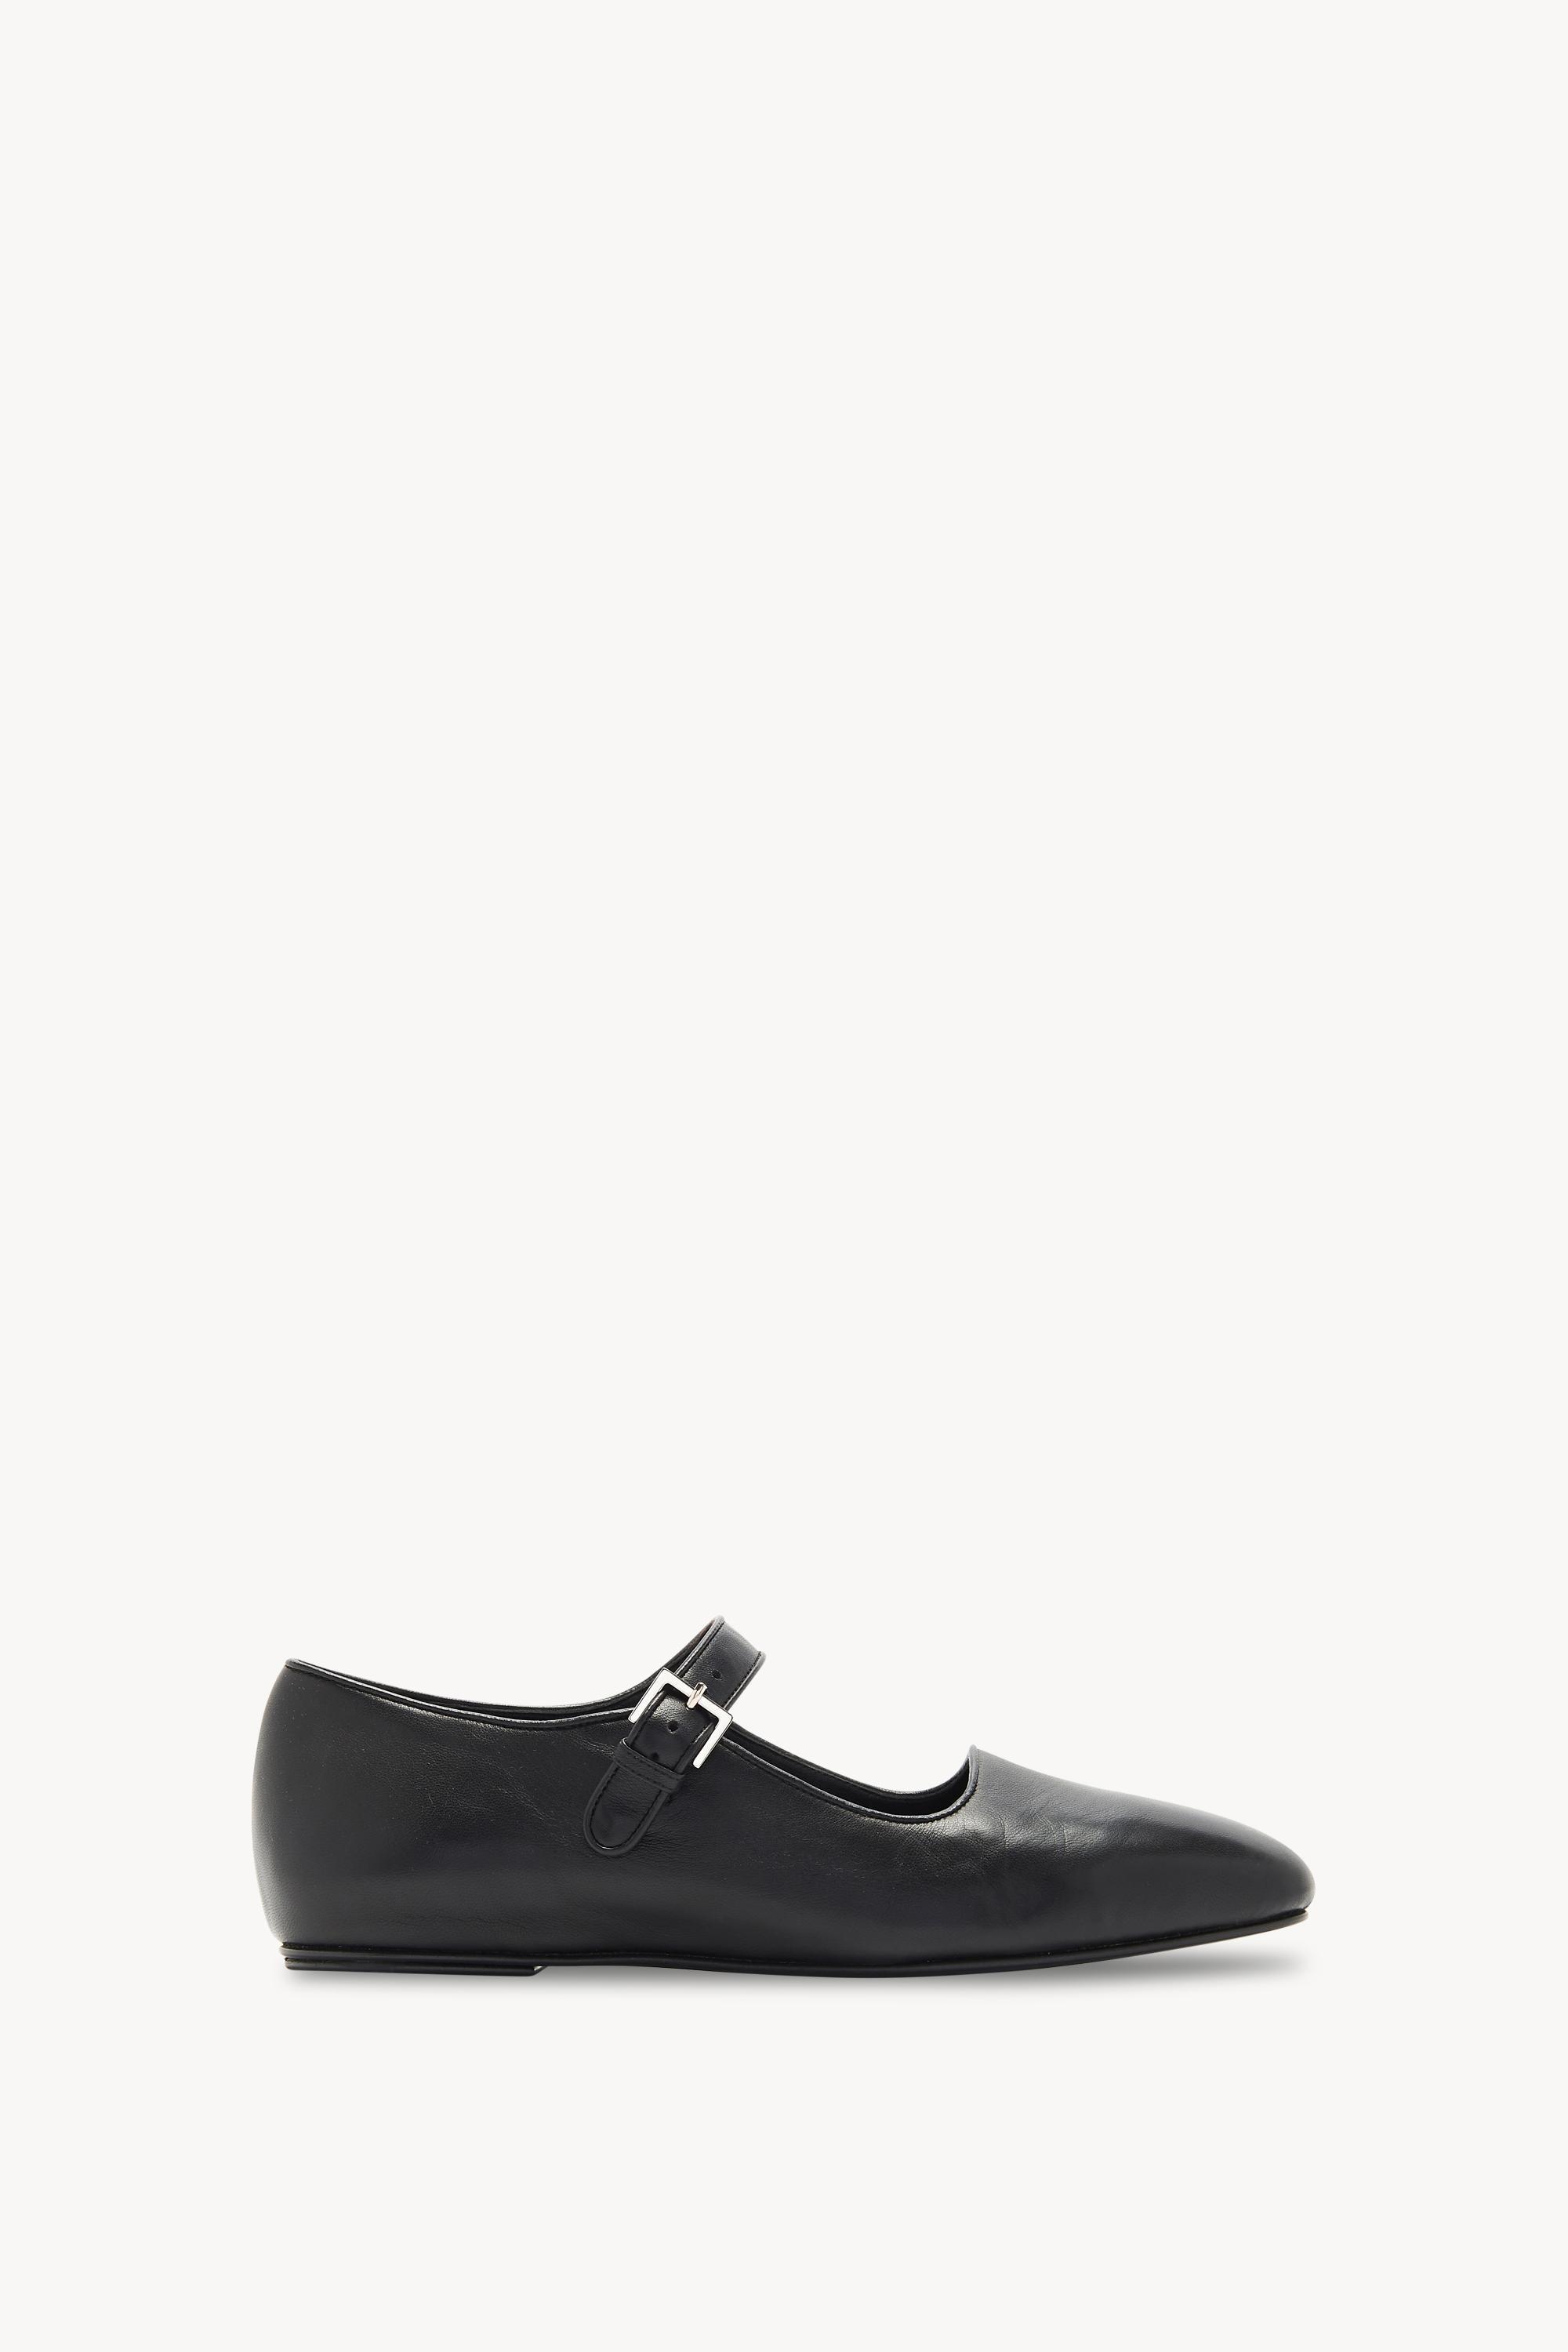 The Row Ava Shoe In Leather in Black - Lyst